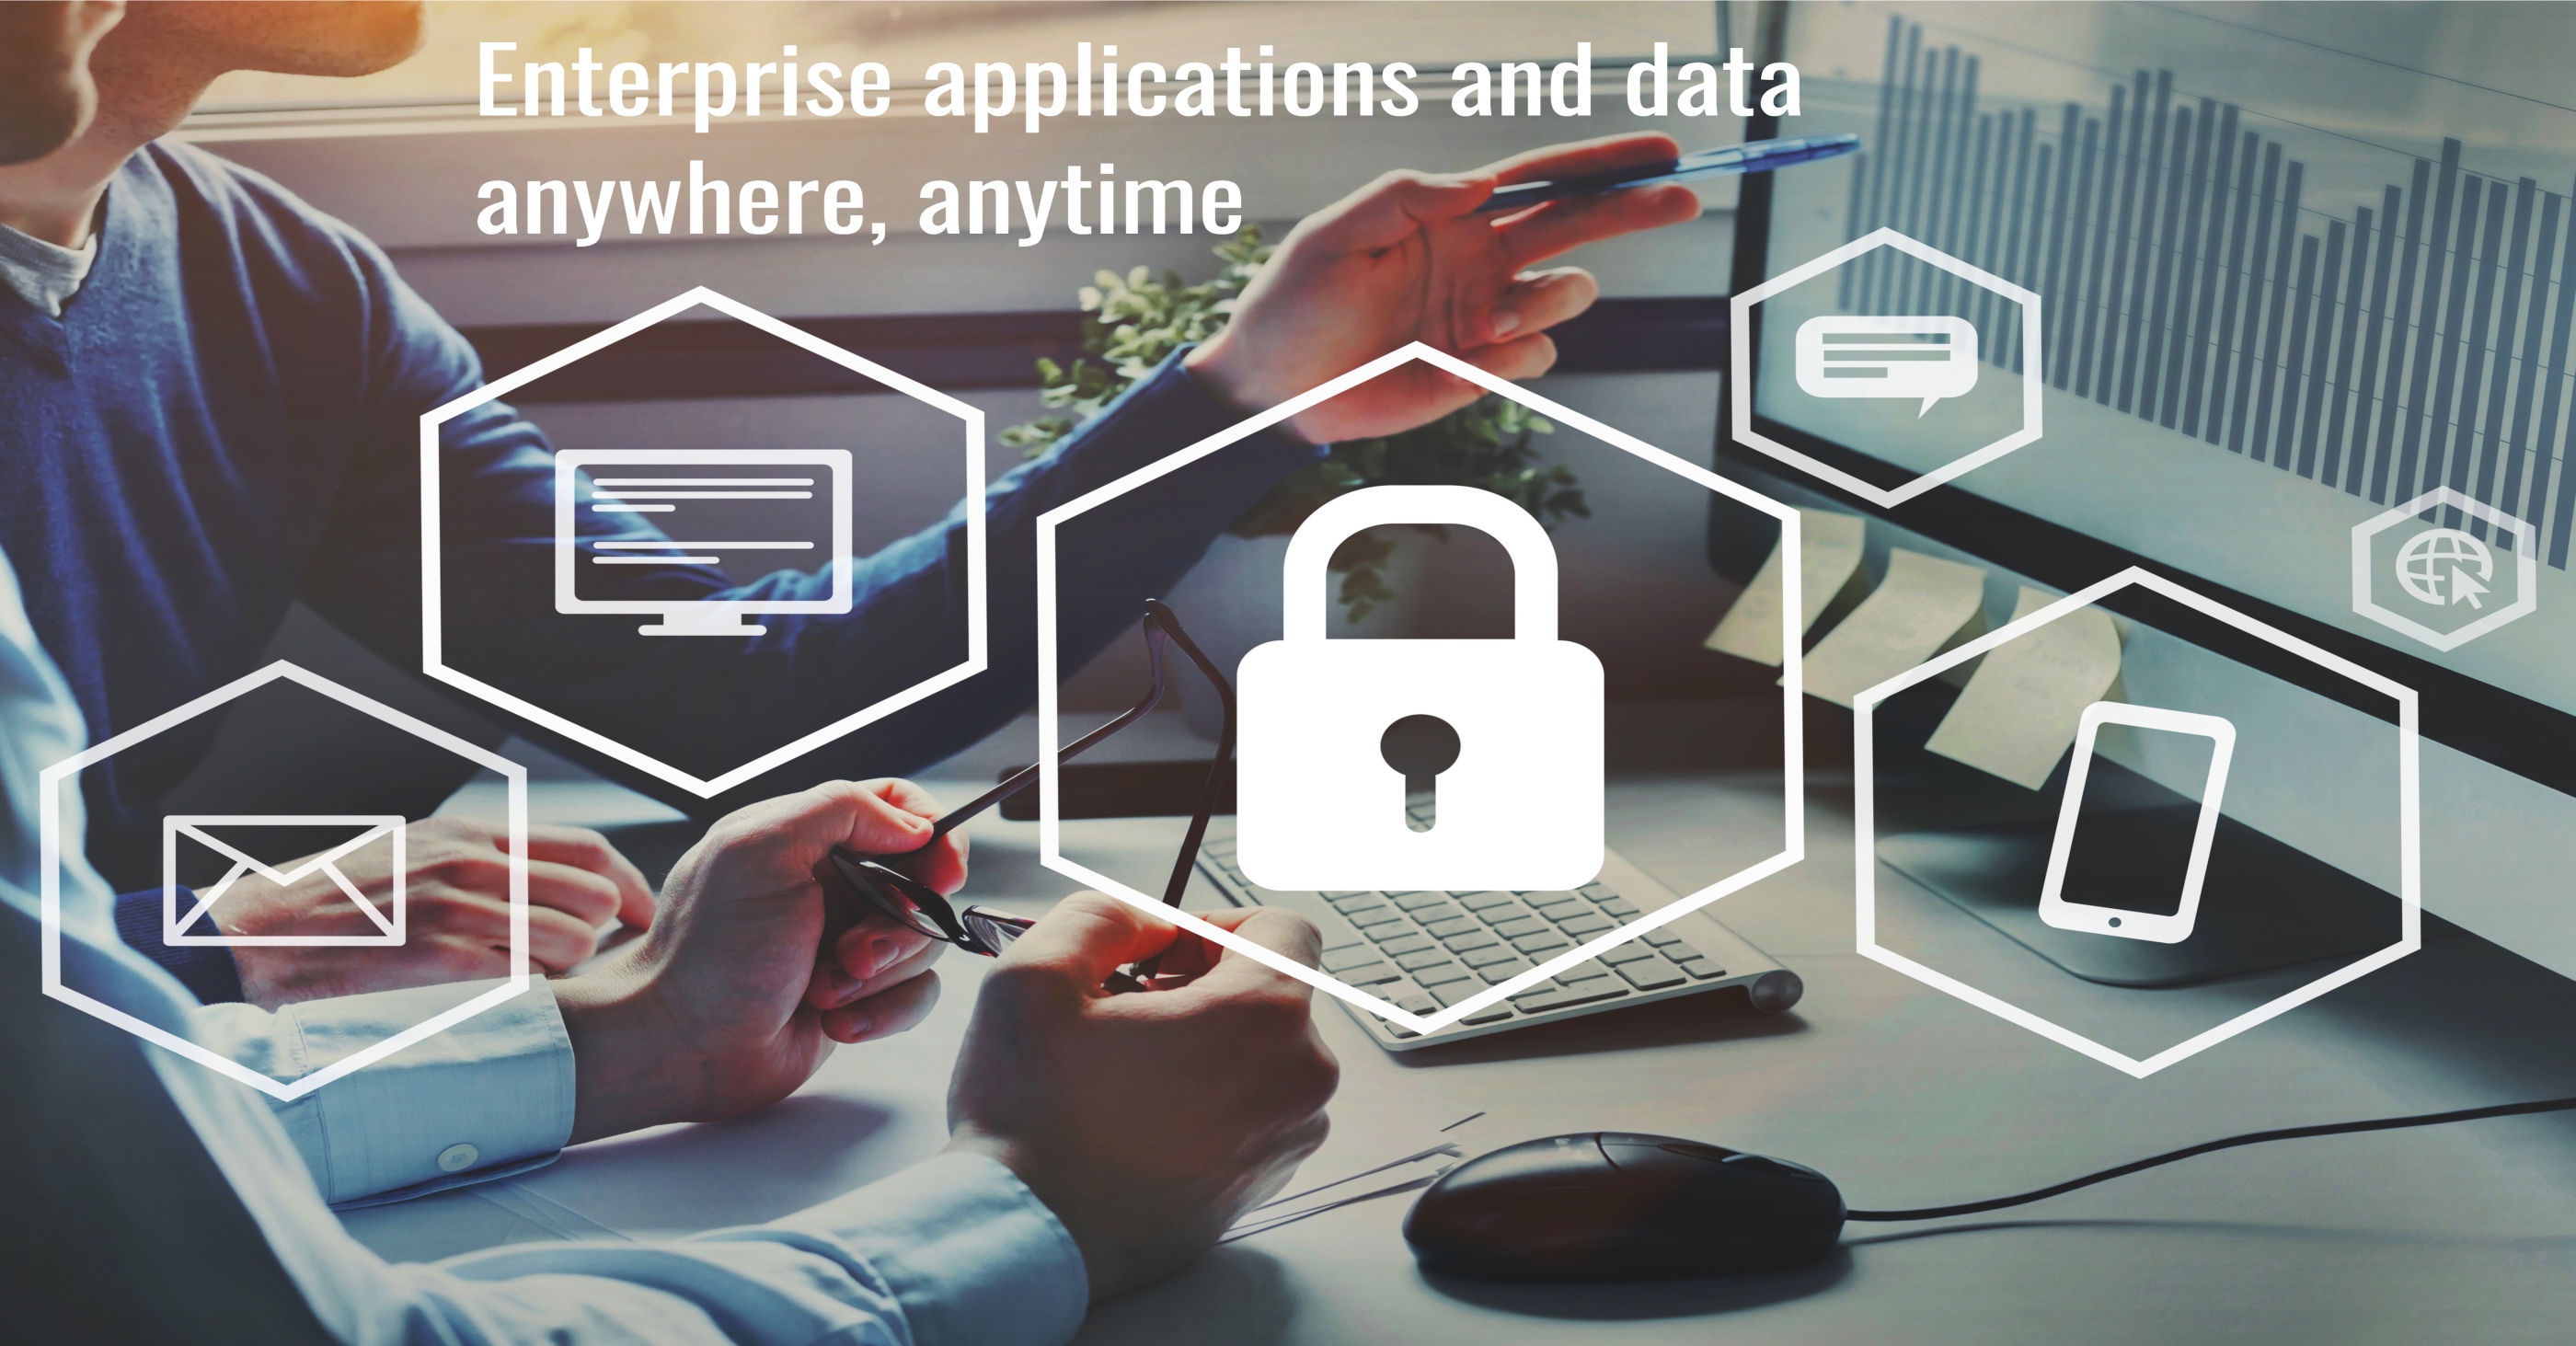 End User Computing - Enterprise applications and data anytime, anywhere